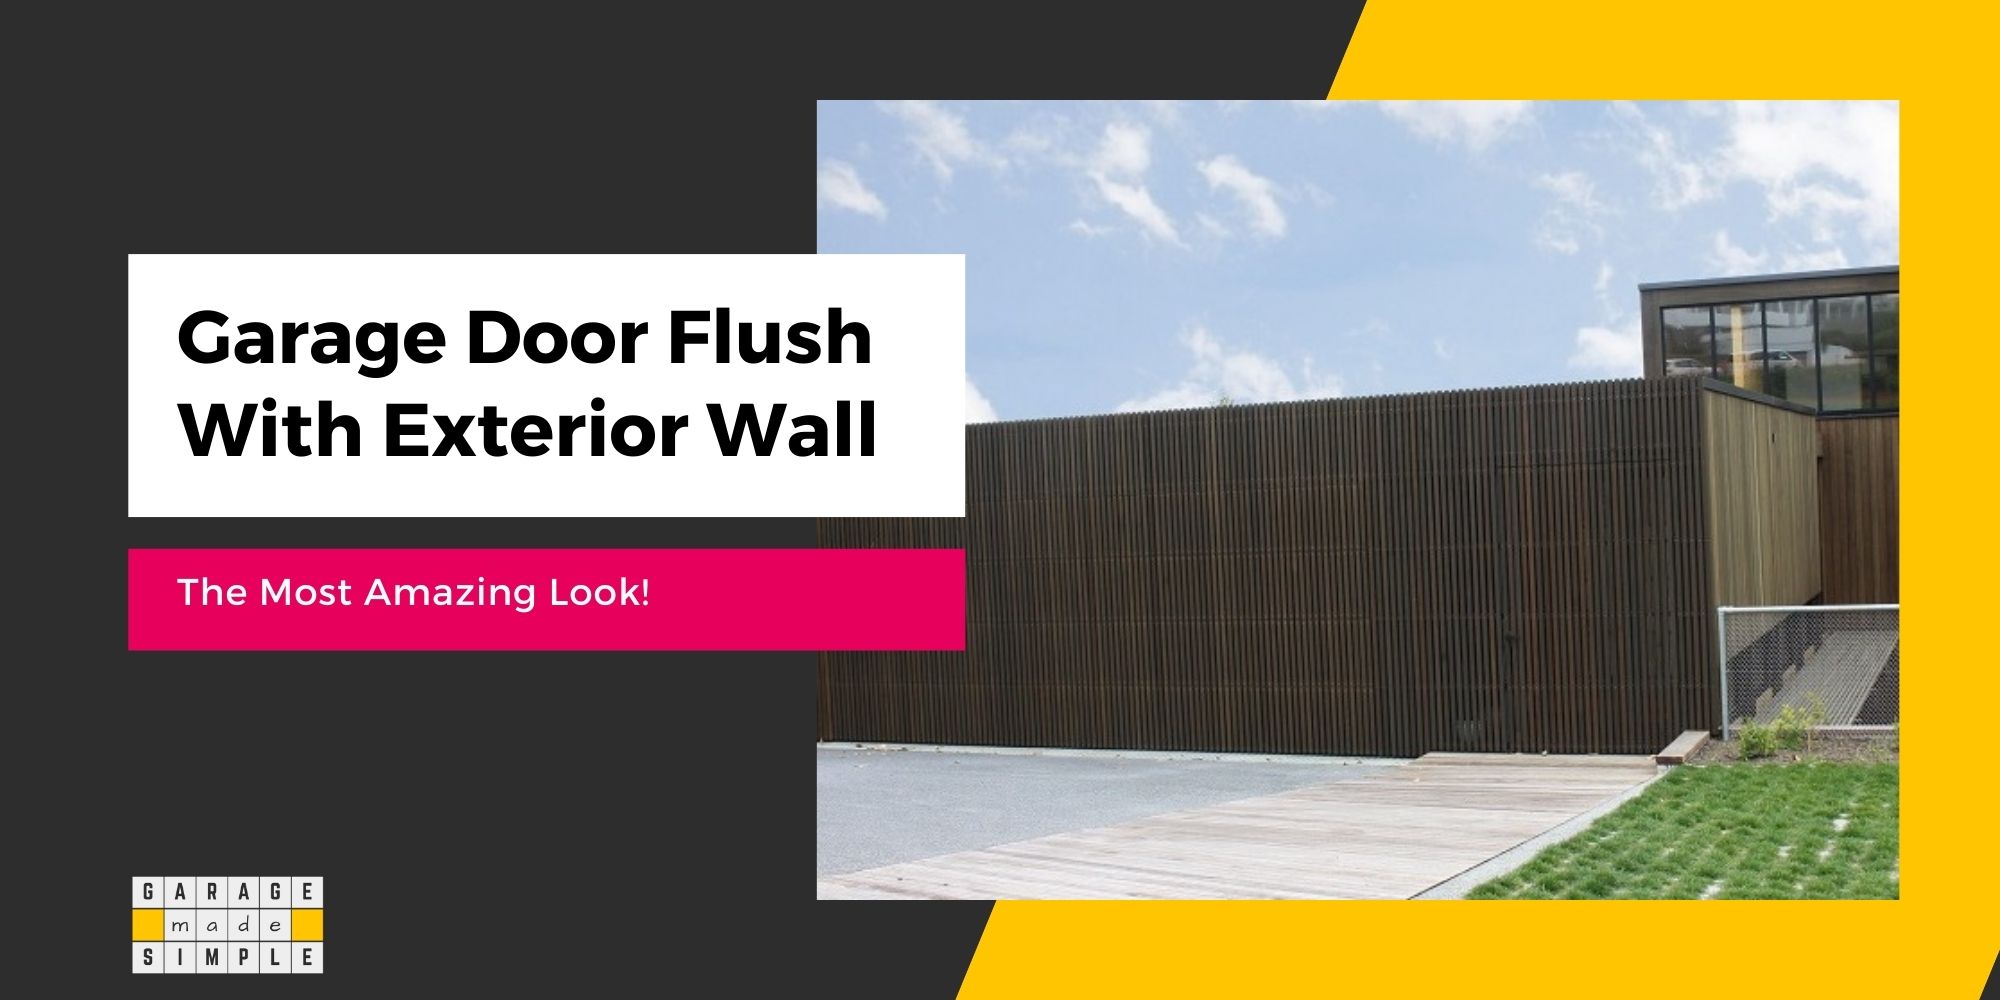 Garage Door Flush With Exterior Wall (The Most Amazing Look!)